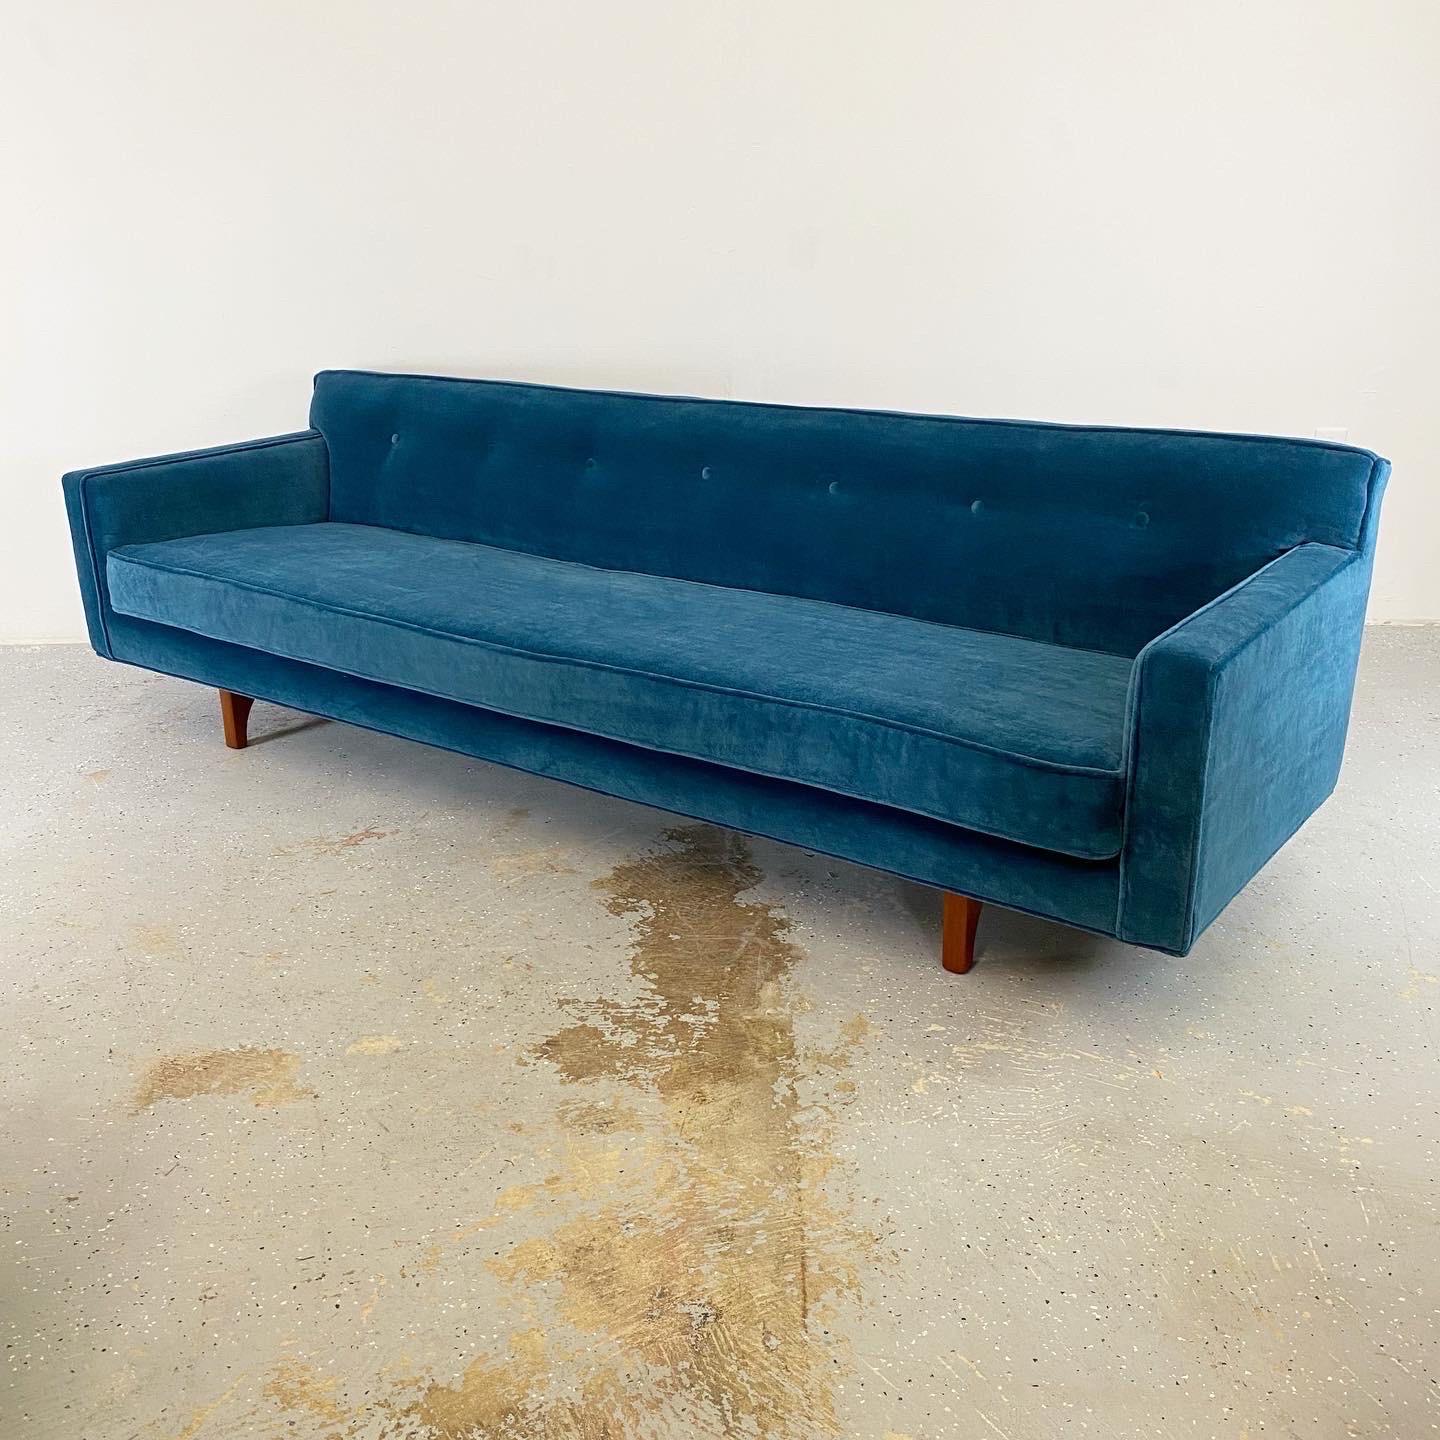 Edward Wormley Bracket Back Sofa, Dunbar In Good Condition For Sale In Raleigh, NC